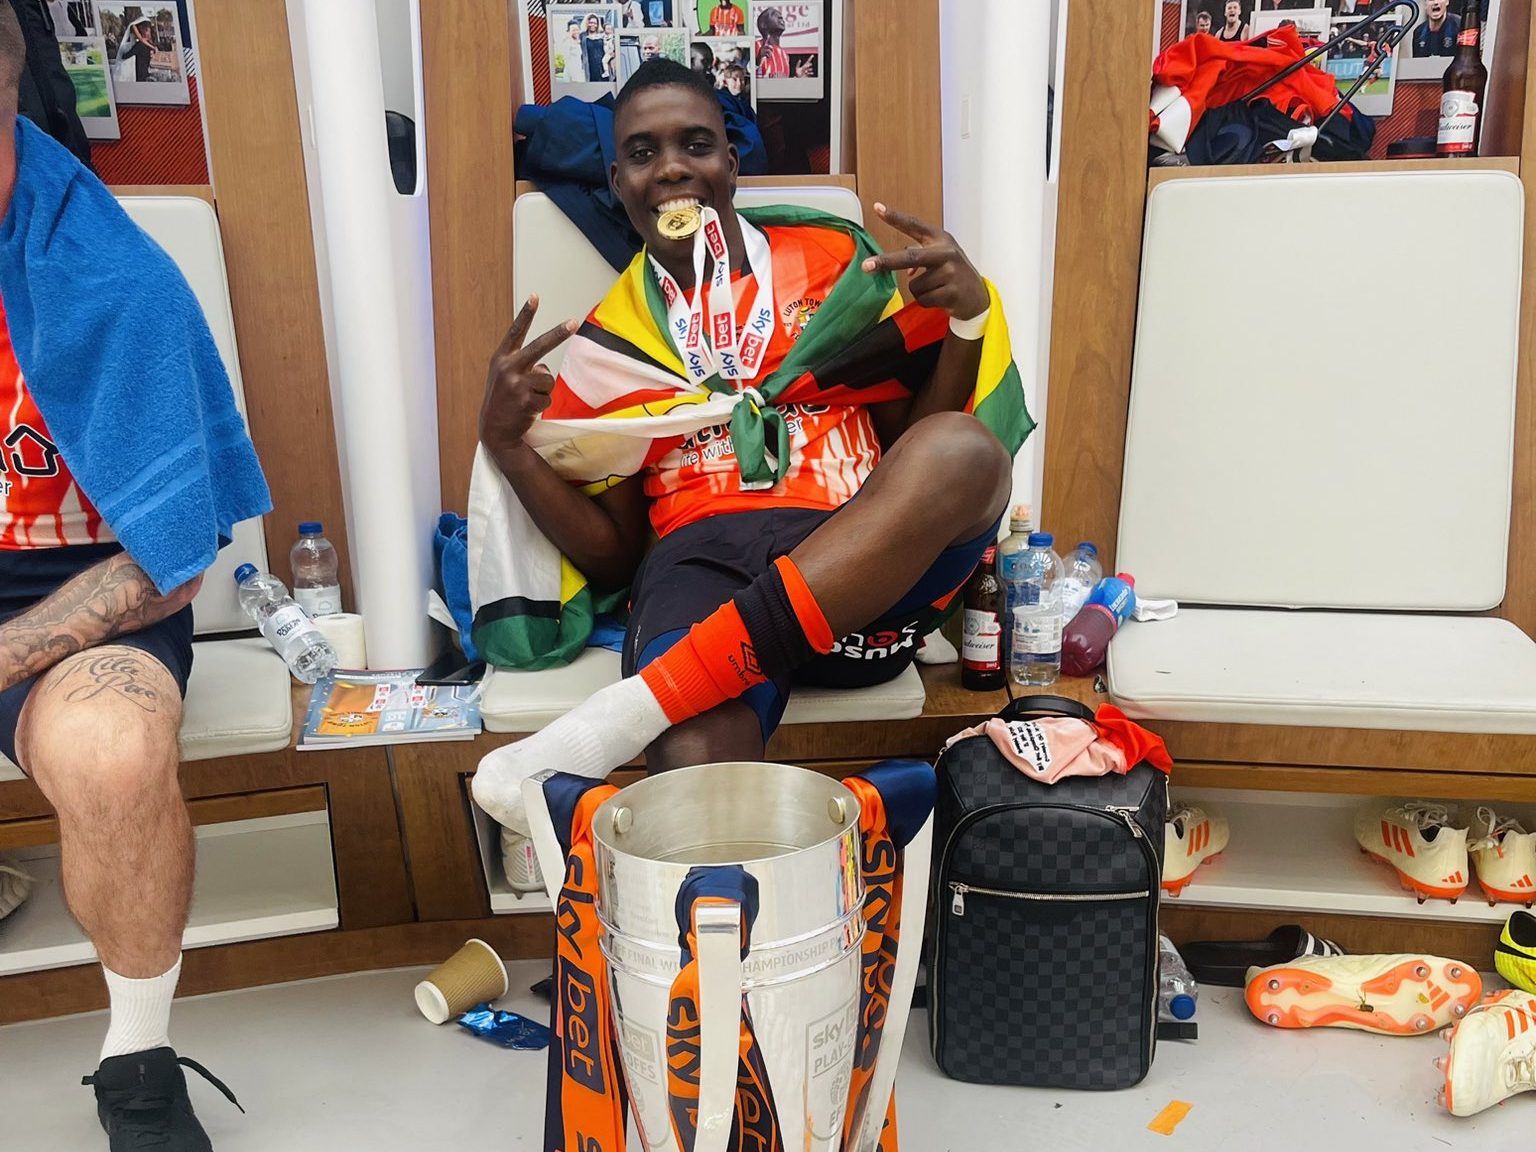 Zimbabwe international Marvelous Nakamba celebrates at Wembley on Saturday 27th May 2023 after helping Luton Town FC beat Coventry City FC to secure promotion to English Premier League.